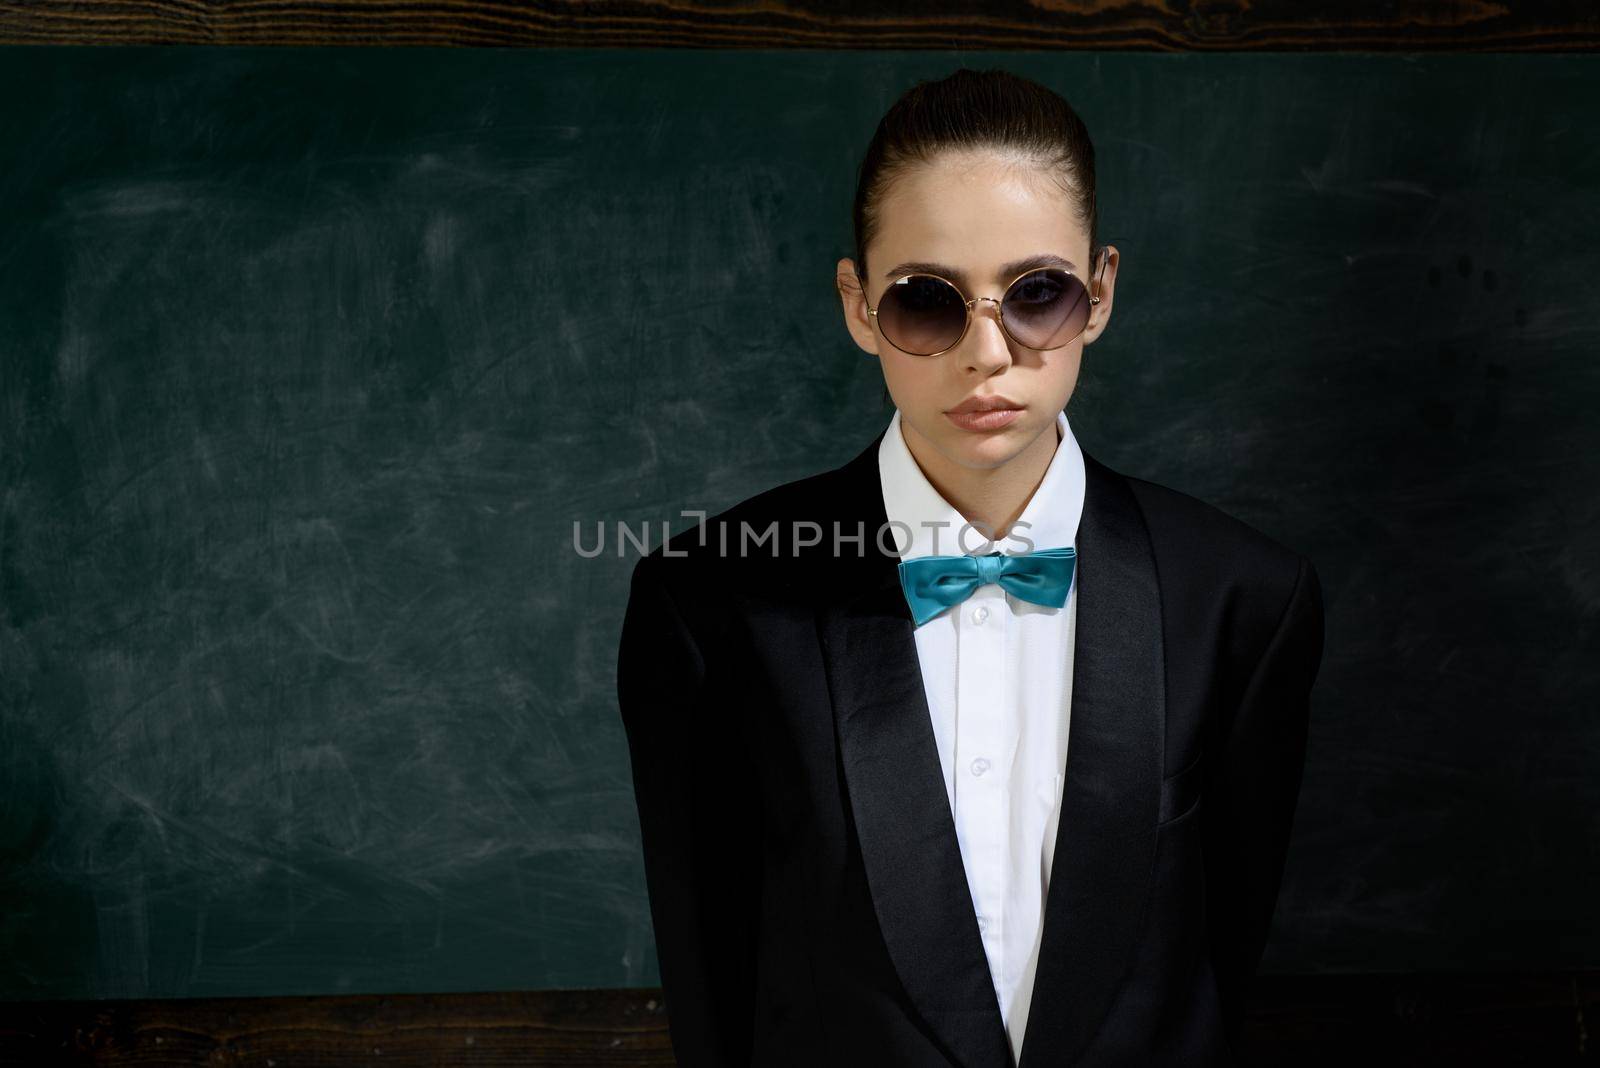 Woman wear masculine clothes tuxedo bow tie and eyeglasses. Sunglasses formal style. Girl formal jacket suit and sunglasses copy space. Fashion trend. Stylish sunglasses accessory. Fashion outfit.